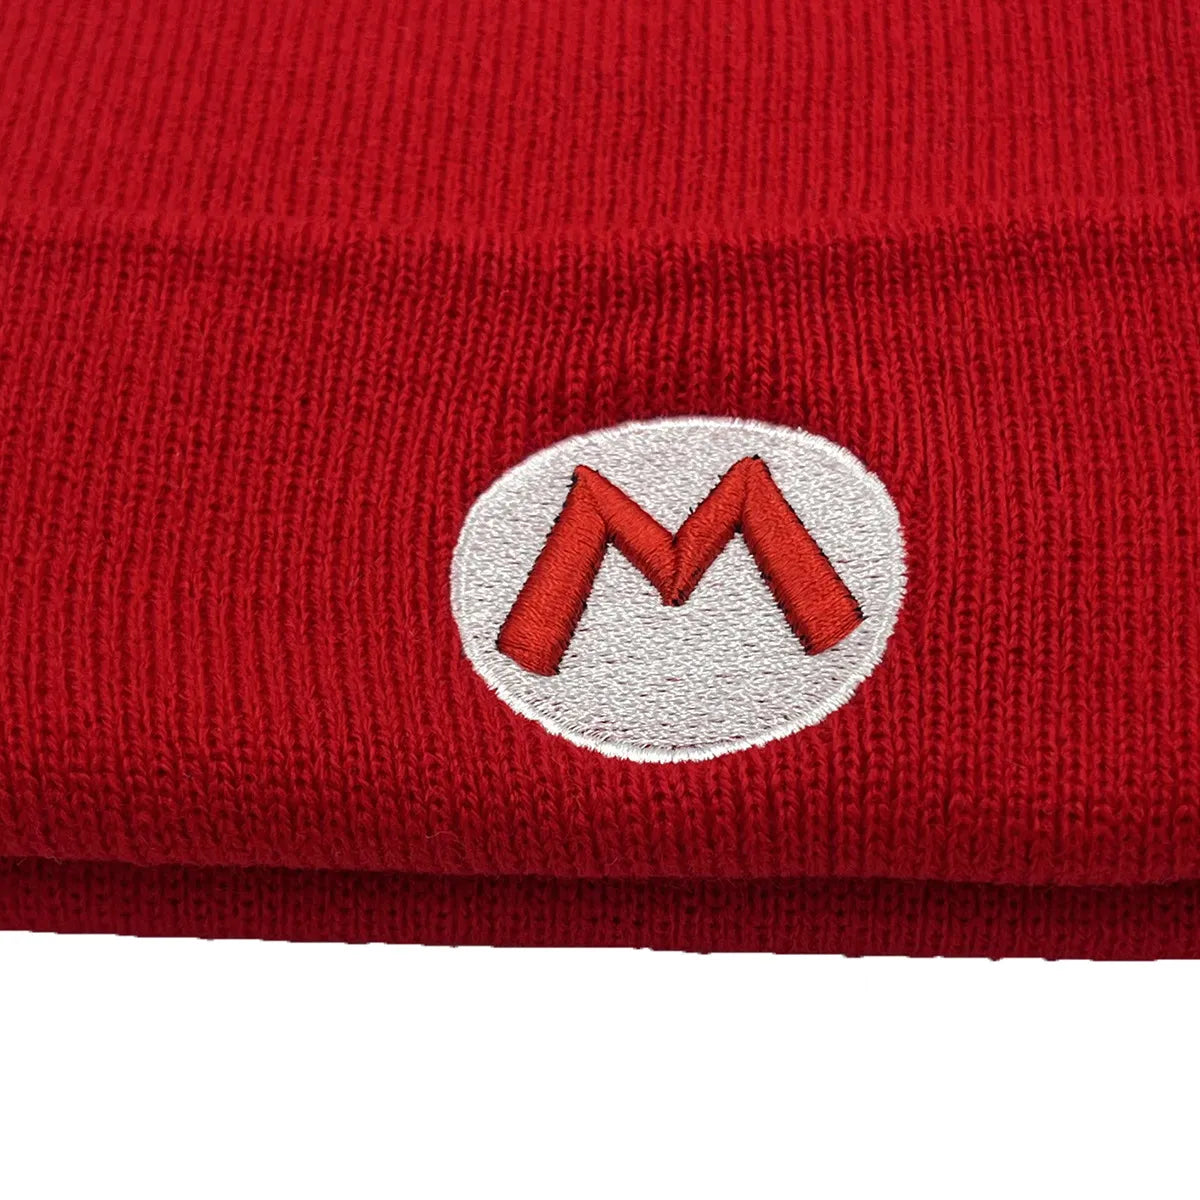 LIMITED Super Mario Embroidered Beanie